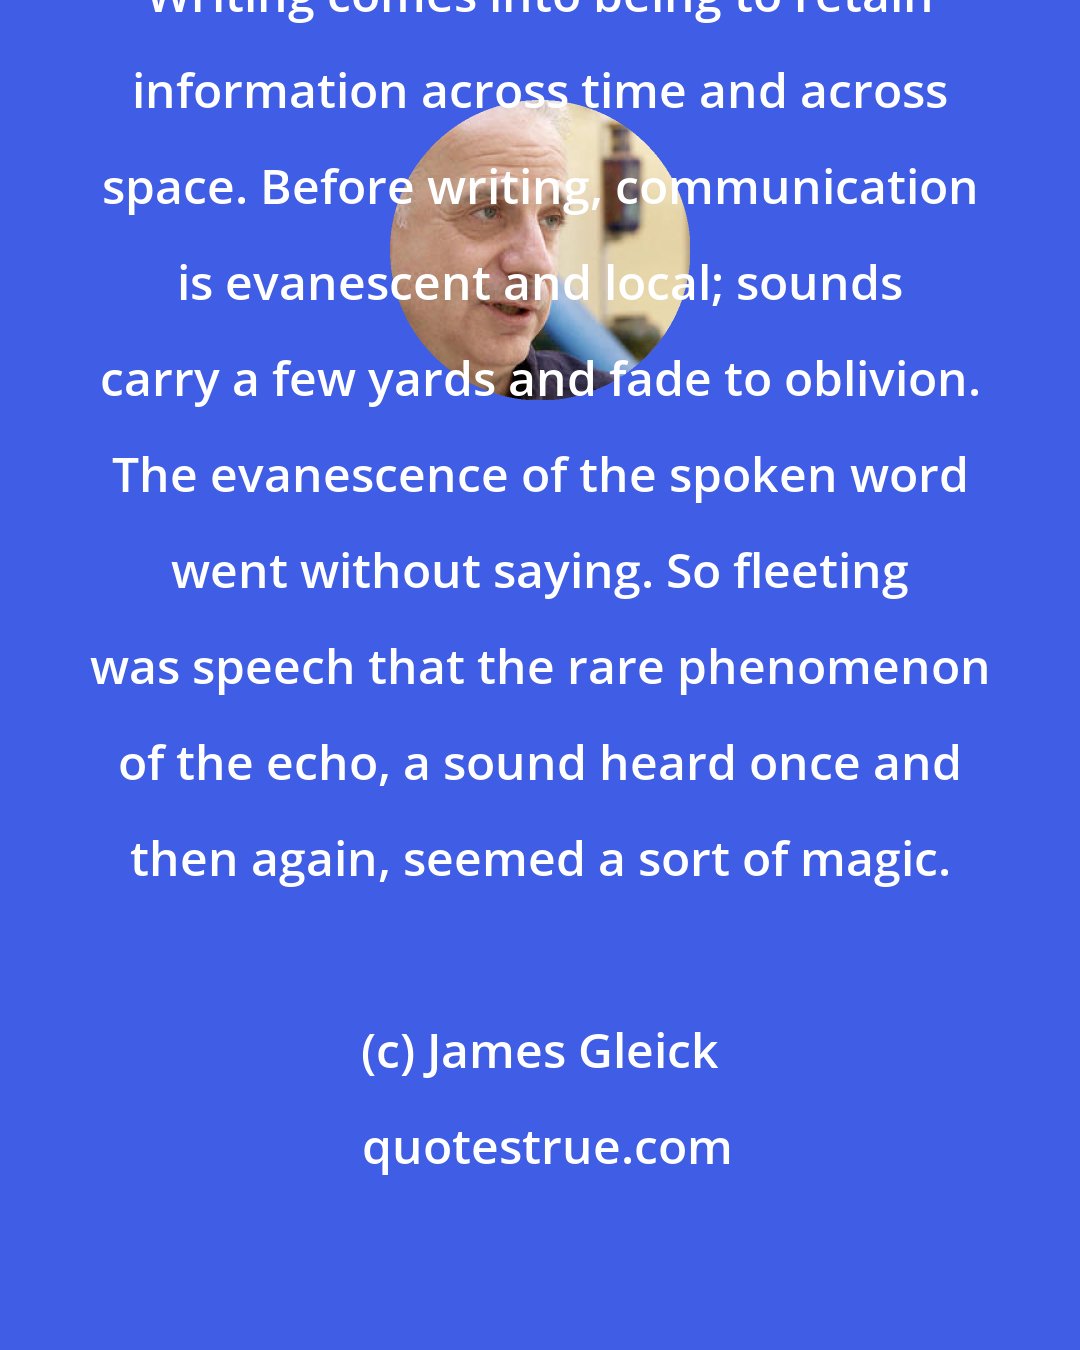 James Gleick: Writing comes into being to retain information across time and across space. Before writing, communication is evanescent and local; sounds carry a few yards and fade to oblivion. The evanescence of the spoken word went without saying. So fleeting was speech that the rare phenomenon of the echo, a sound heard once and then again, seemed a sort of magic.